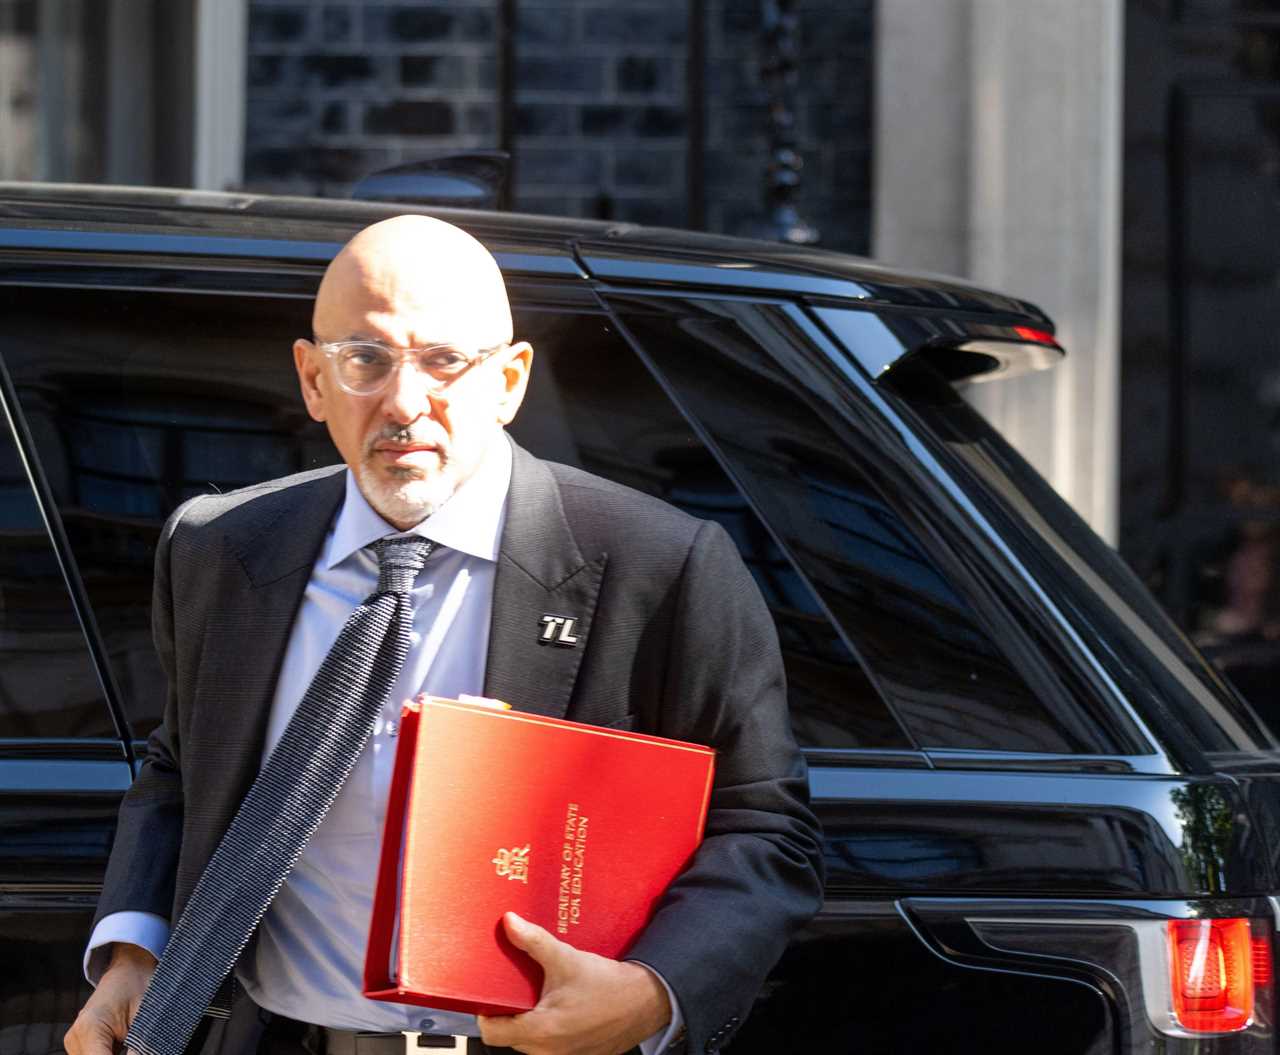 Nadhim Zahawi will read the riot act to woke exam bosses for dumping white poets from syllabus in the name of diversity